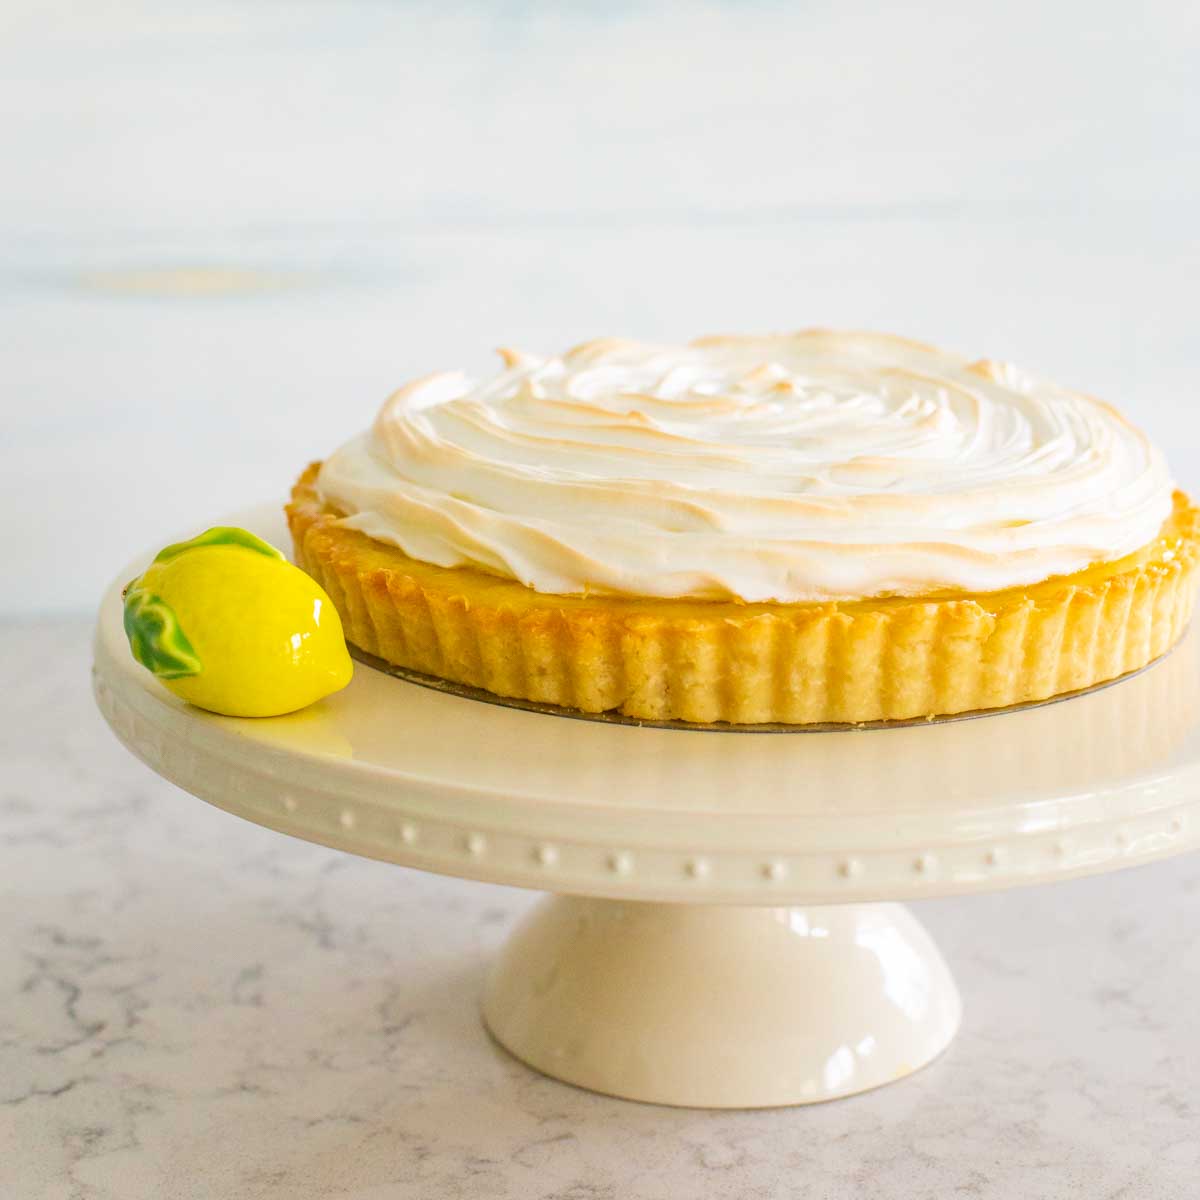 A tart on a cake stand.